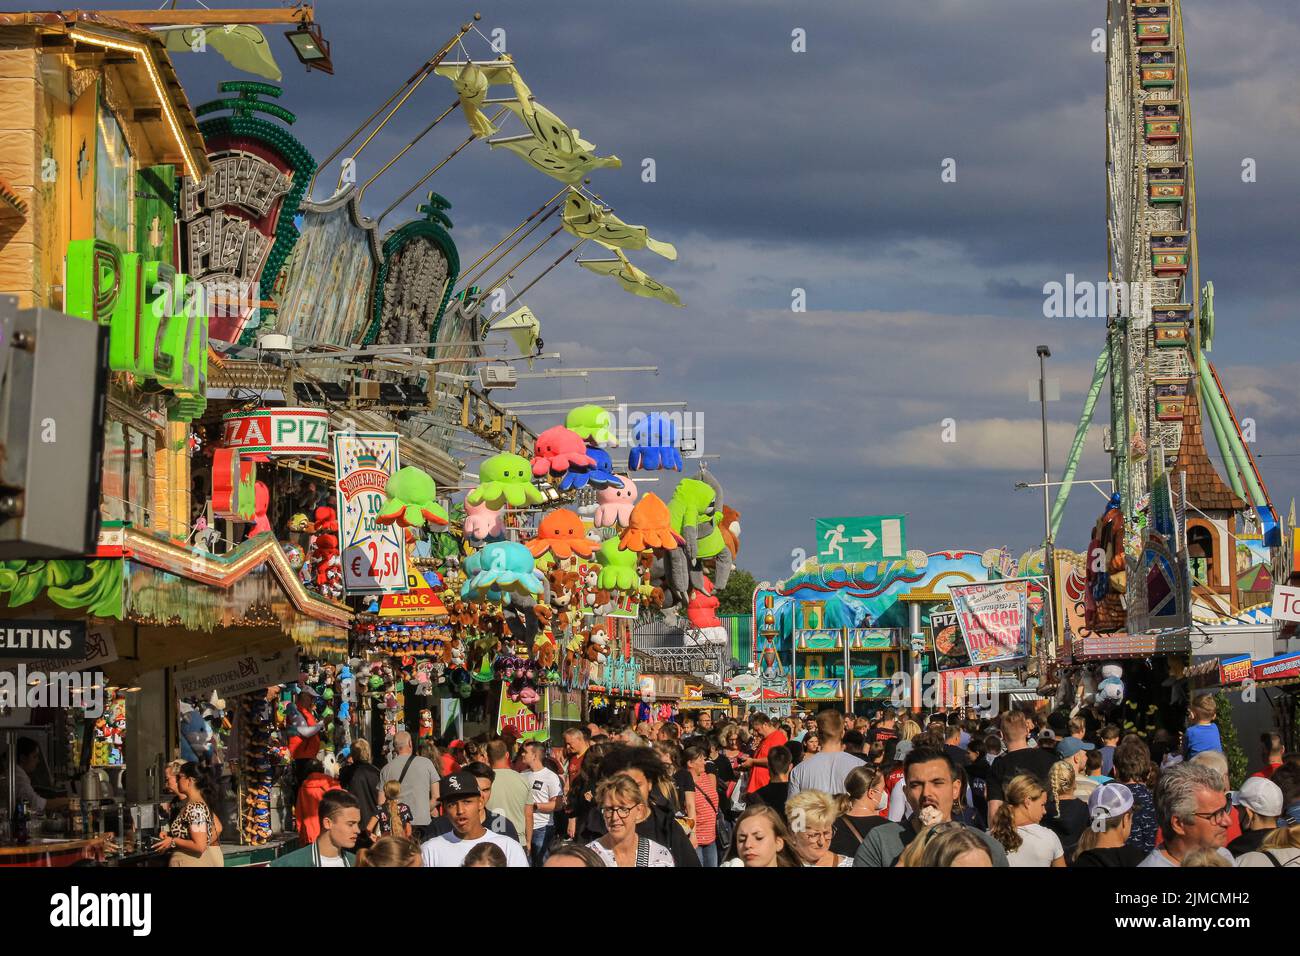 Crange, Herne, NRW, 05th Aug, 2022. The official opening day of the 2022 Cranger Kirmes, Germany's 3rd largest funfair and the largest of its kind in NRW, sees thousands of visitors enjoying the carousels, roller coasters, beer halls, food stalls and other attractions. The popular fair, which was paused during the pandemic, regularly attracts more than 4m visitors during its 10 day run and has been established for decades in its current form, with the fair itself dating back to the early 18th century at Crange. Credit: Imageplotter/Alamy Live News Stock Photo